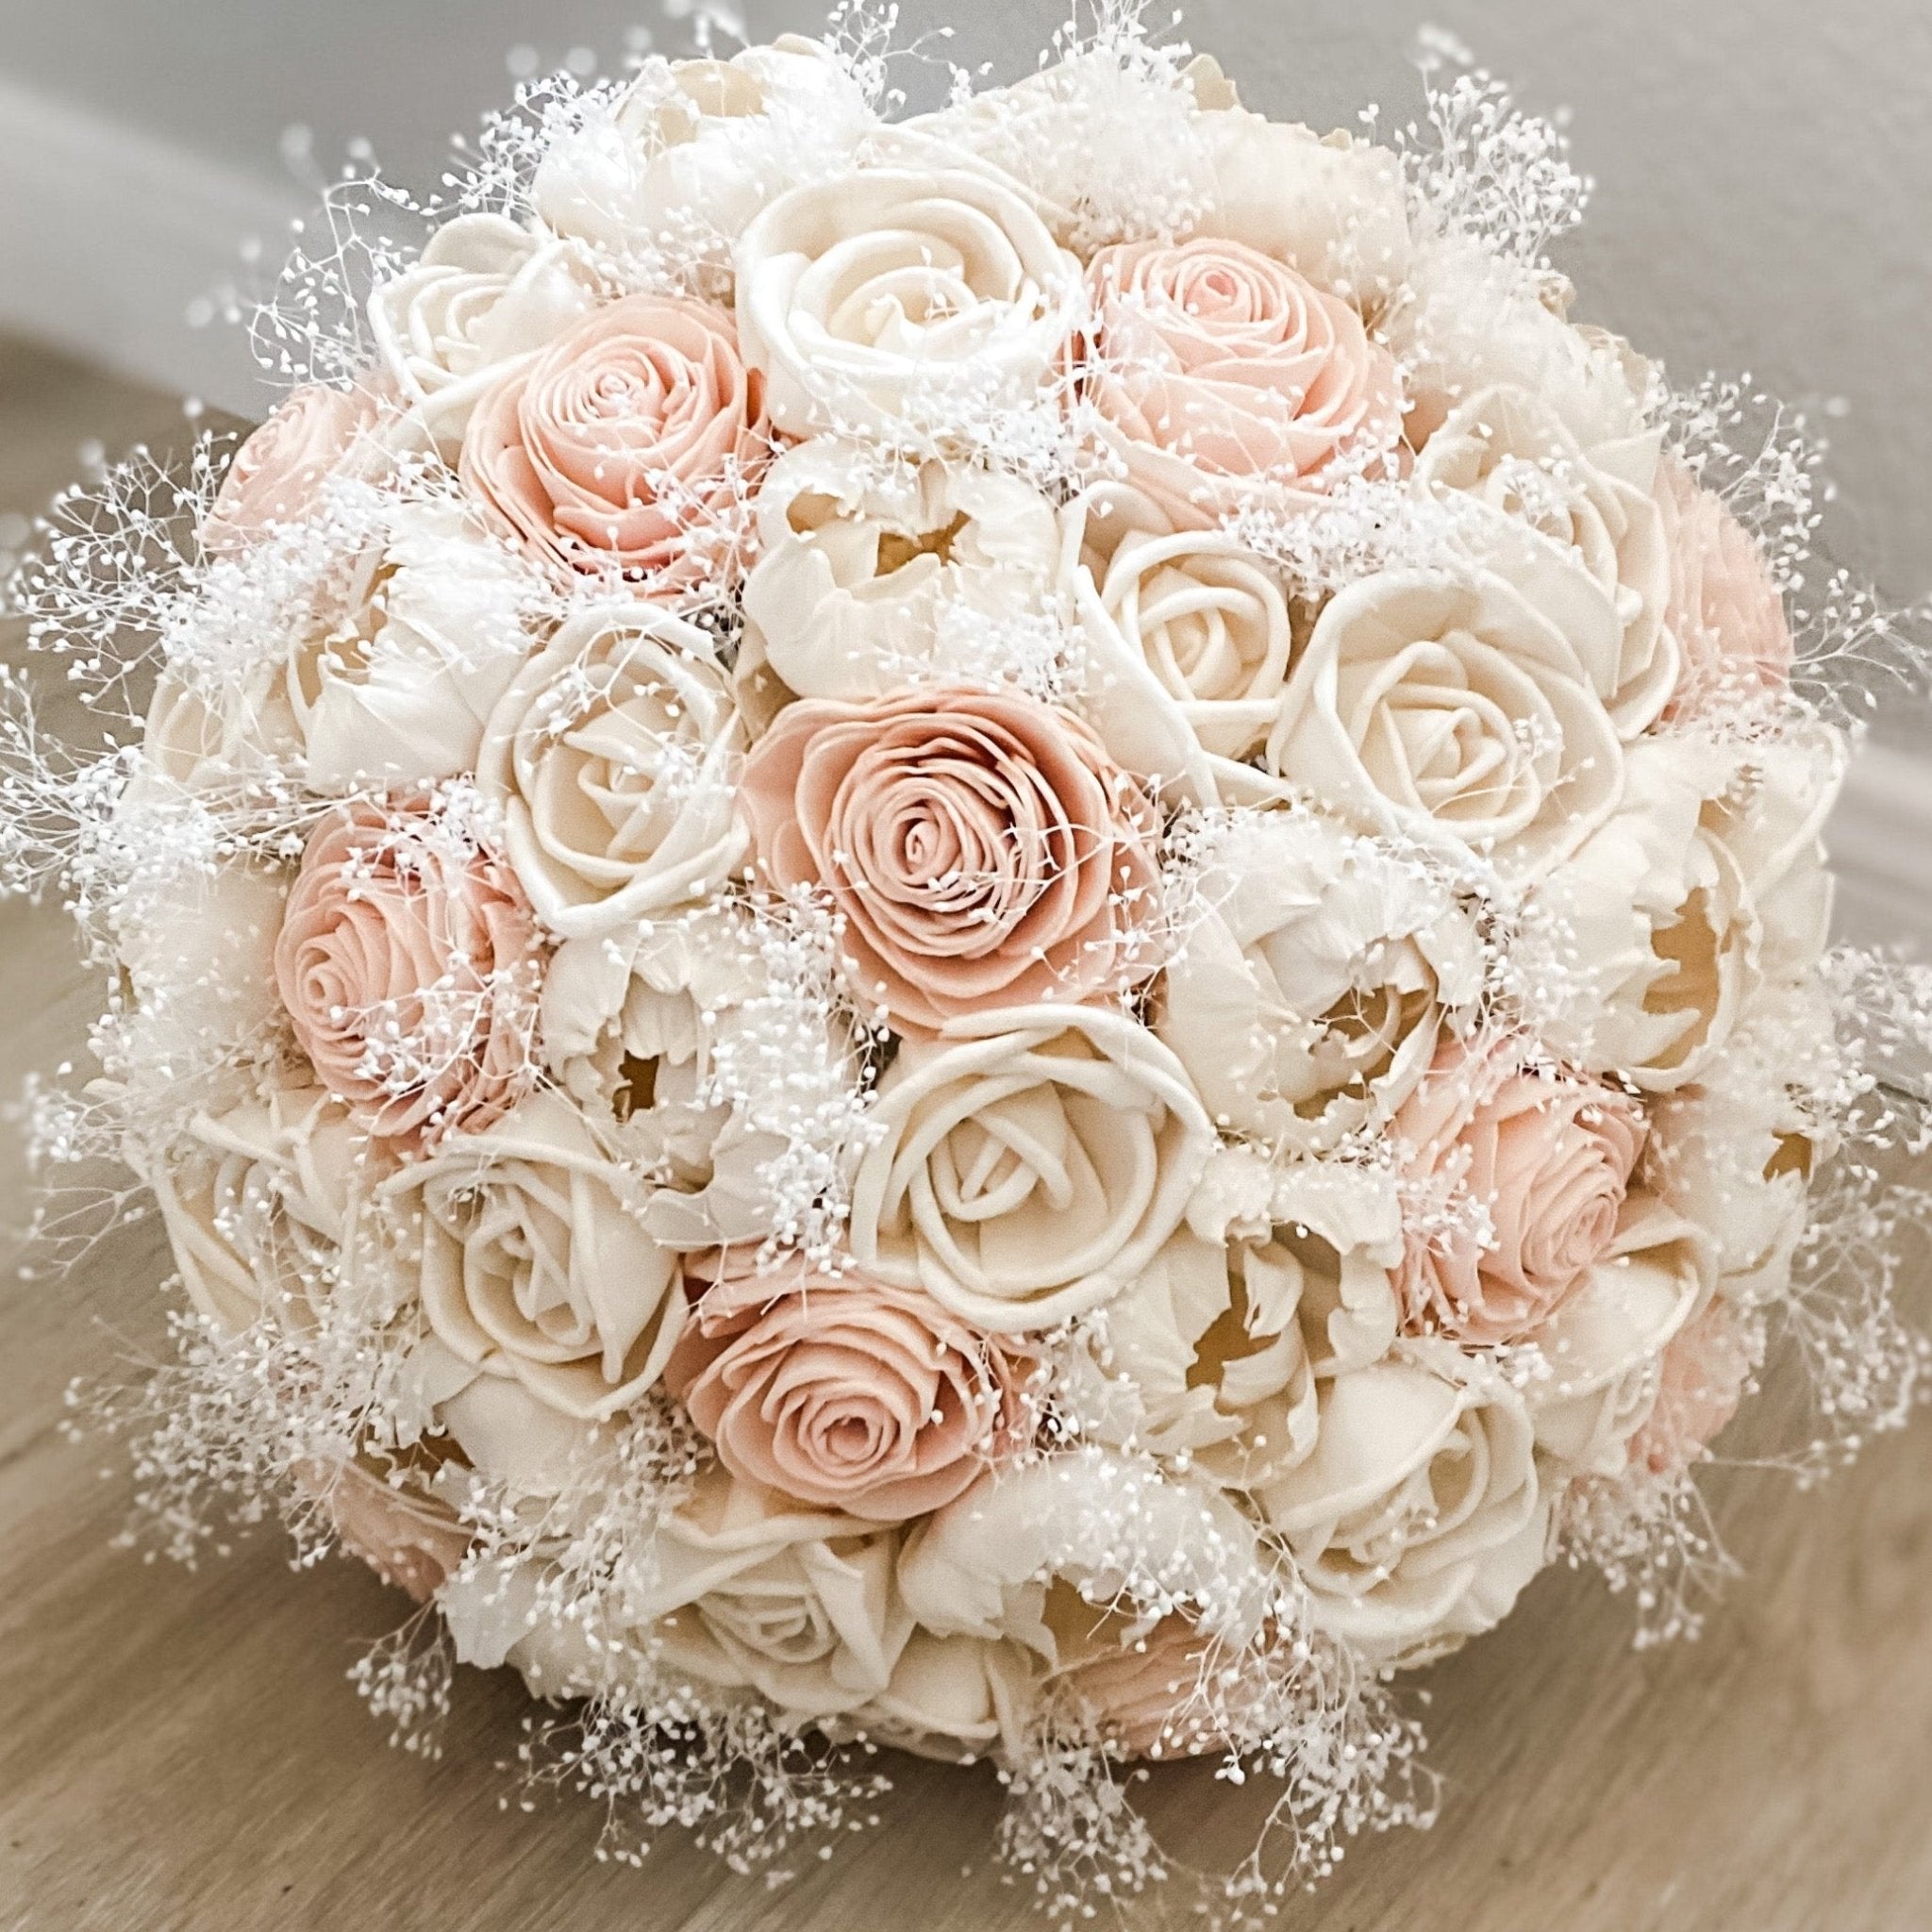 The Enchanting Harmony , A Bouquet of Blush Roses and Ivory Peonies - PapiroExtra Large 12" Bride